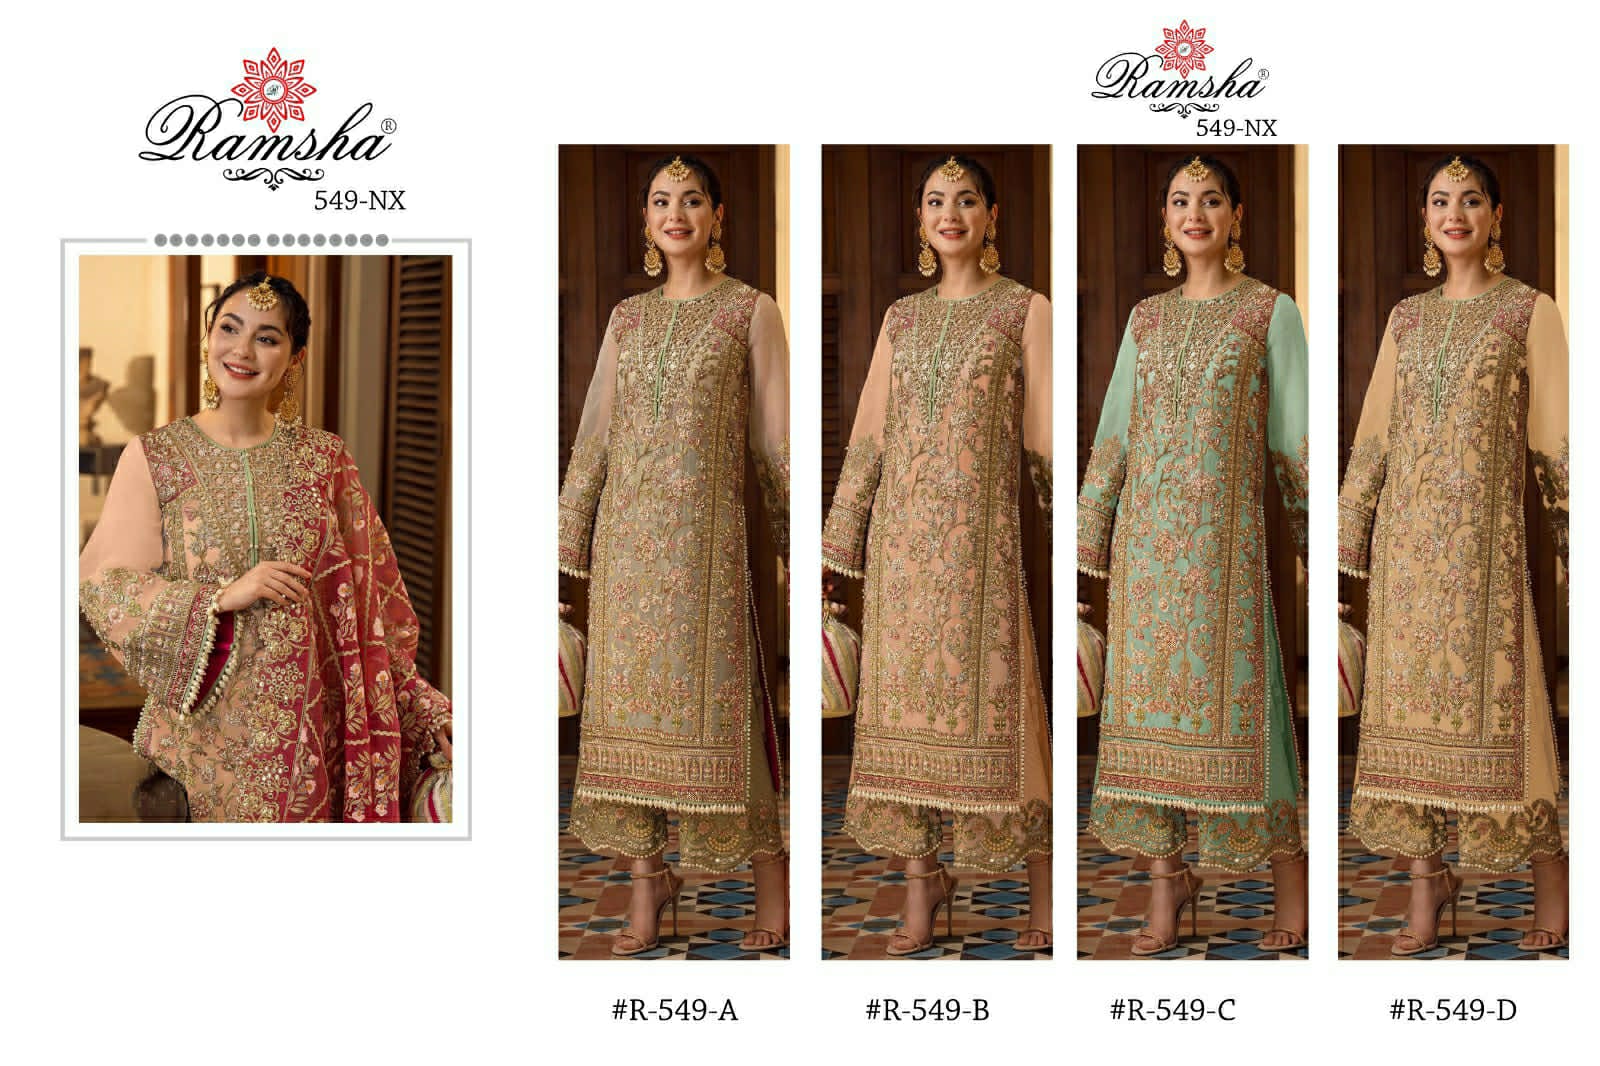 RAMSHA R-549 nx GEORGETTE HEAVY EMBROIDERY WITH BORING PAKISTANI SUIT